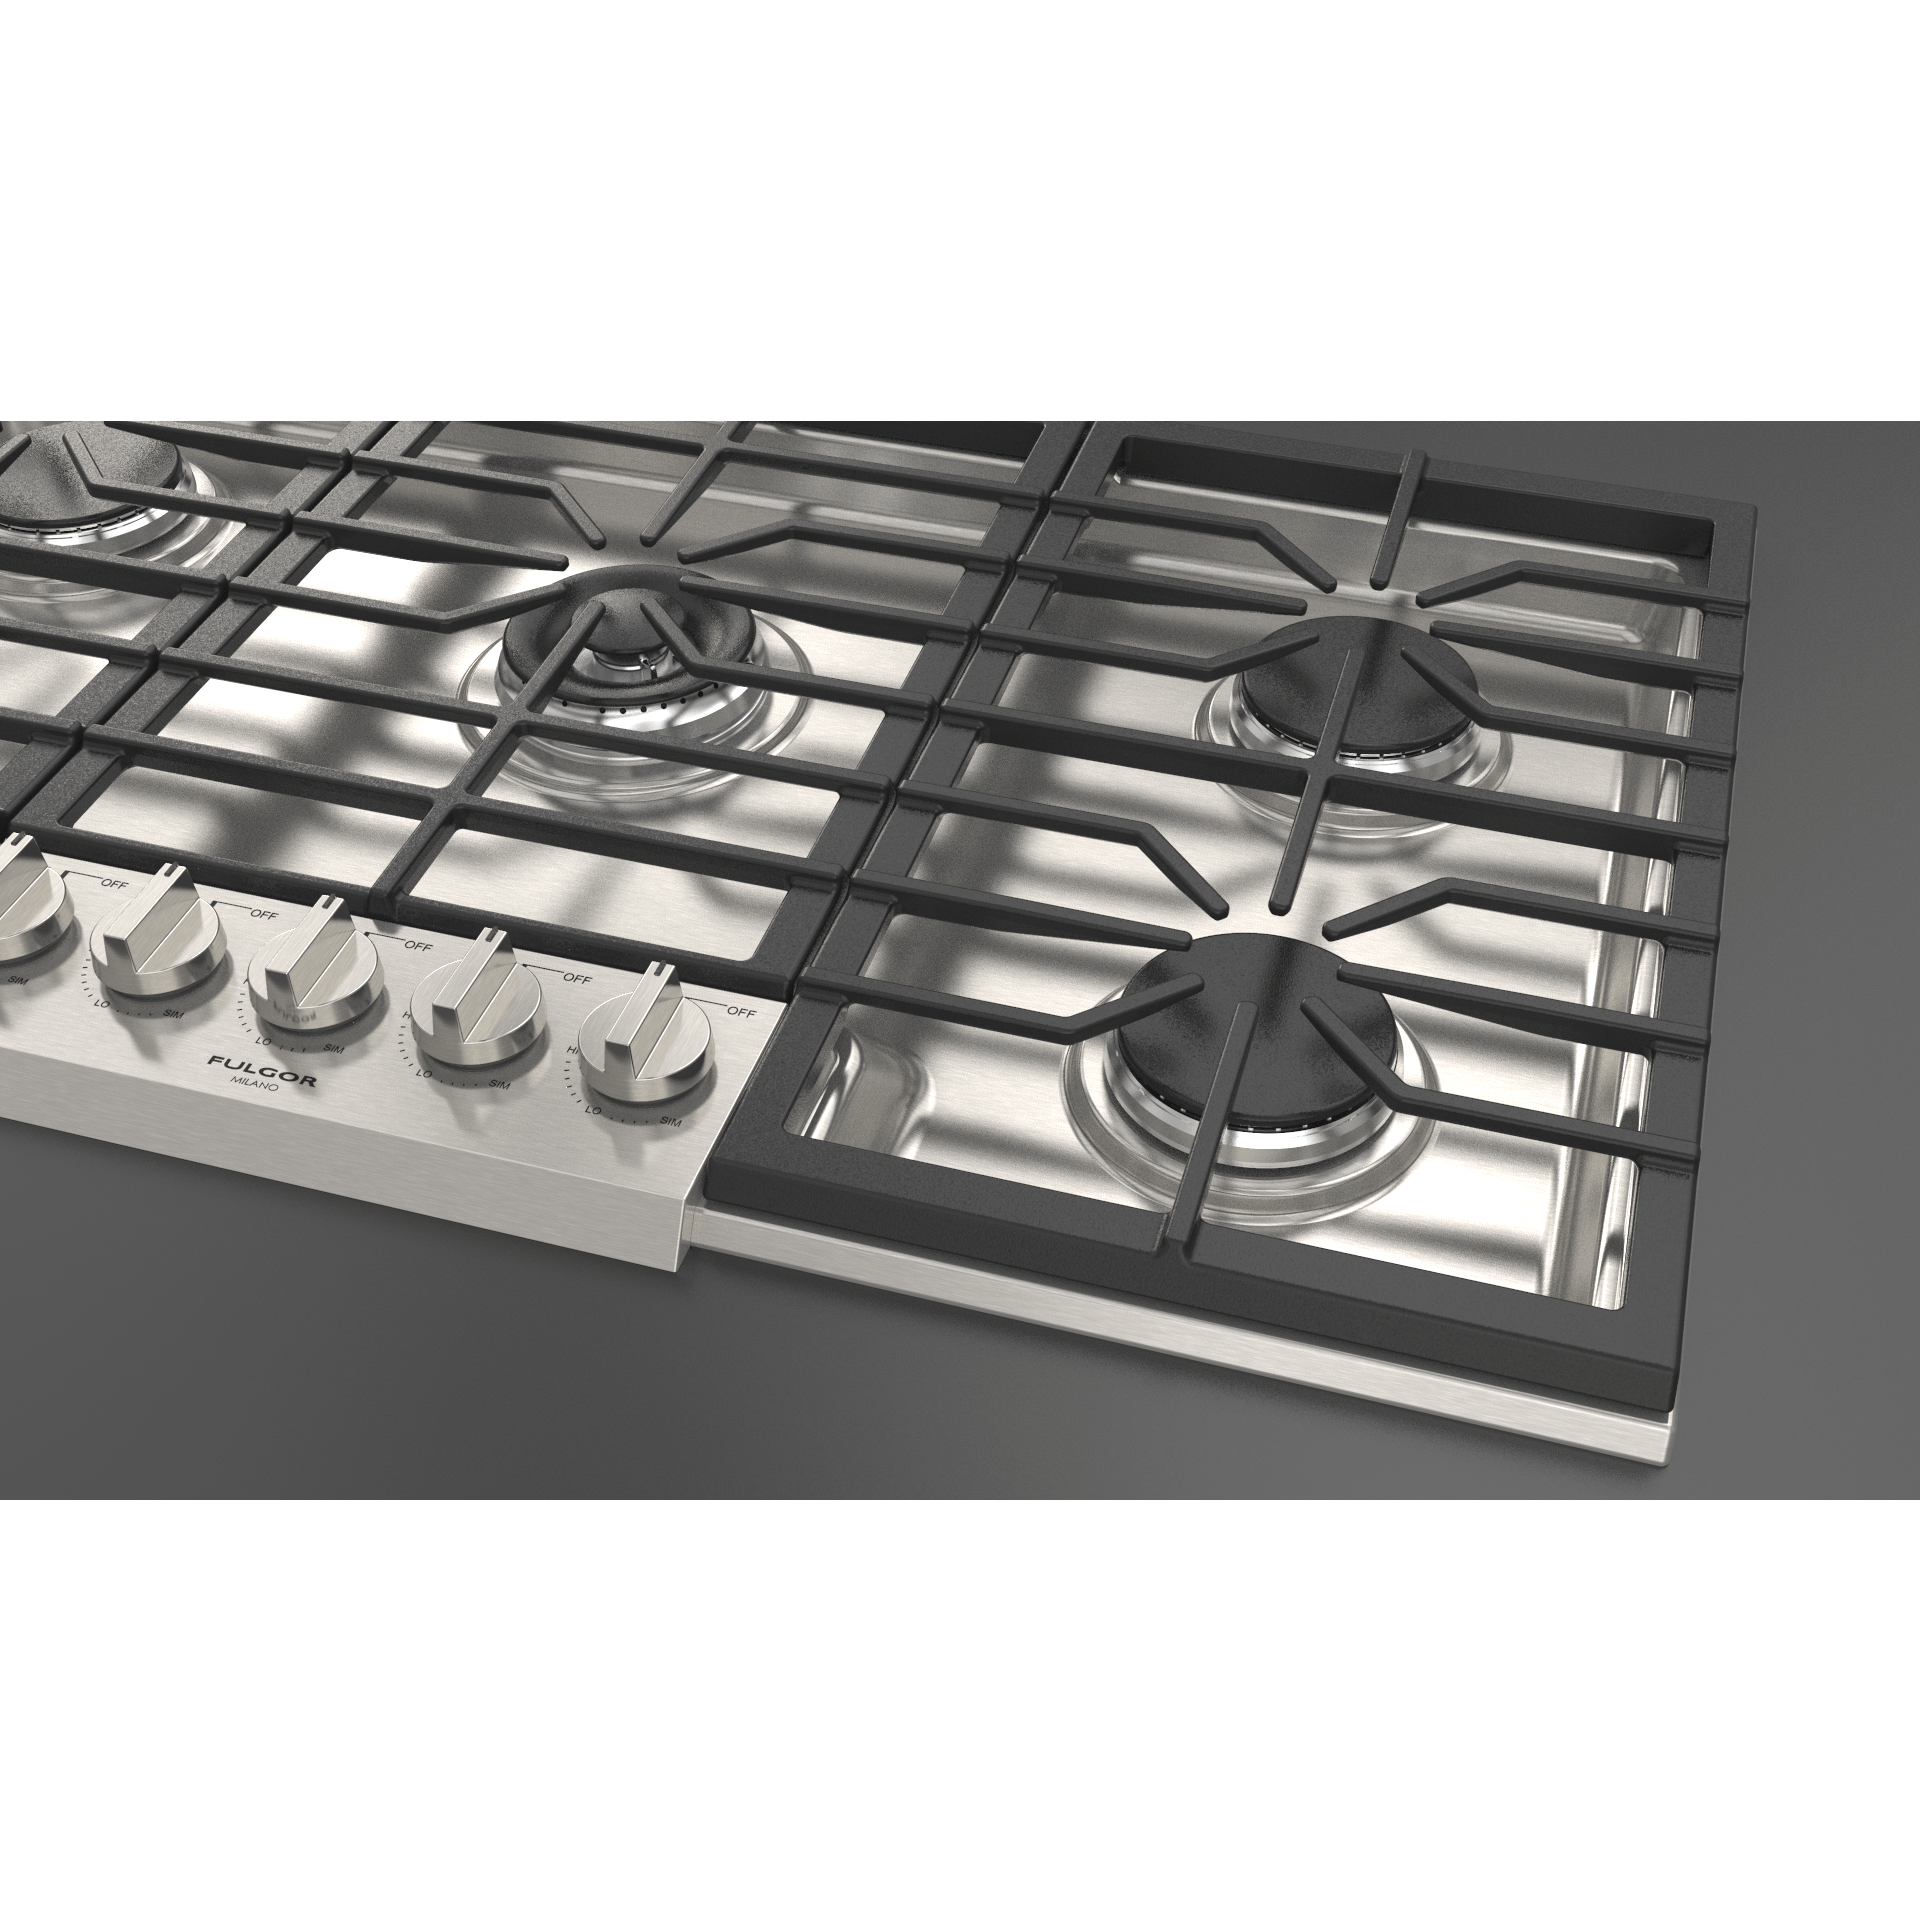 Fulgor Milano 36" Pro-Style Natural Gas Cooktop with 1 Central Dual Burner - F4PGK365S1 Cooktops F4PGK365S1 Luxury Appliances Direct